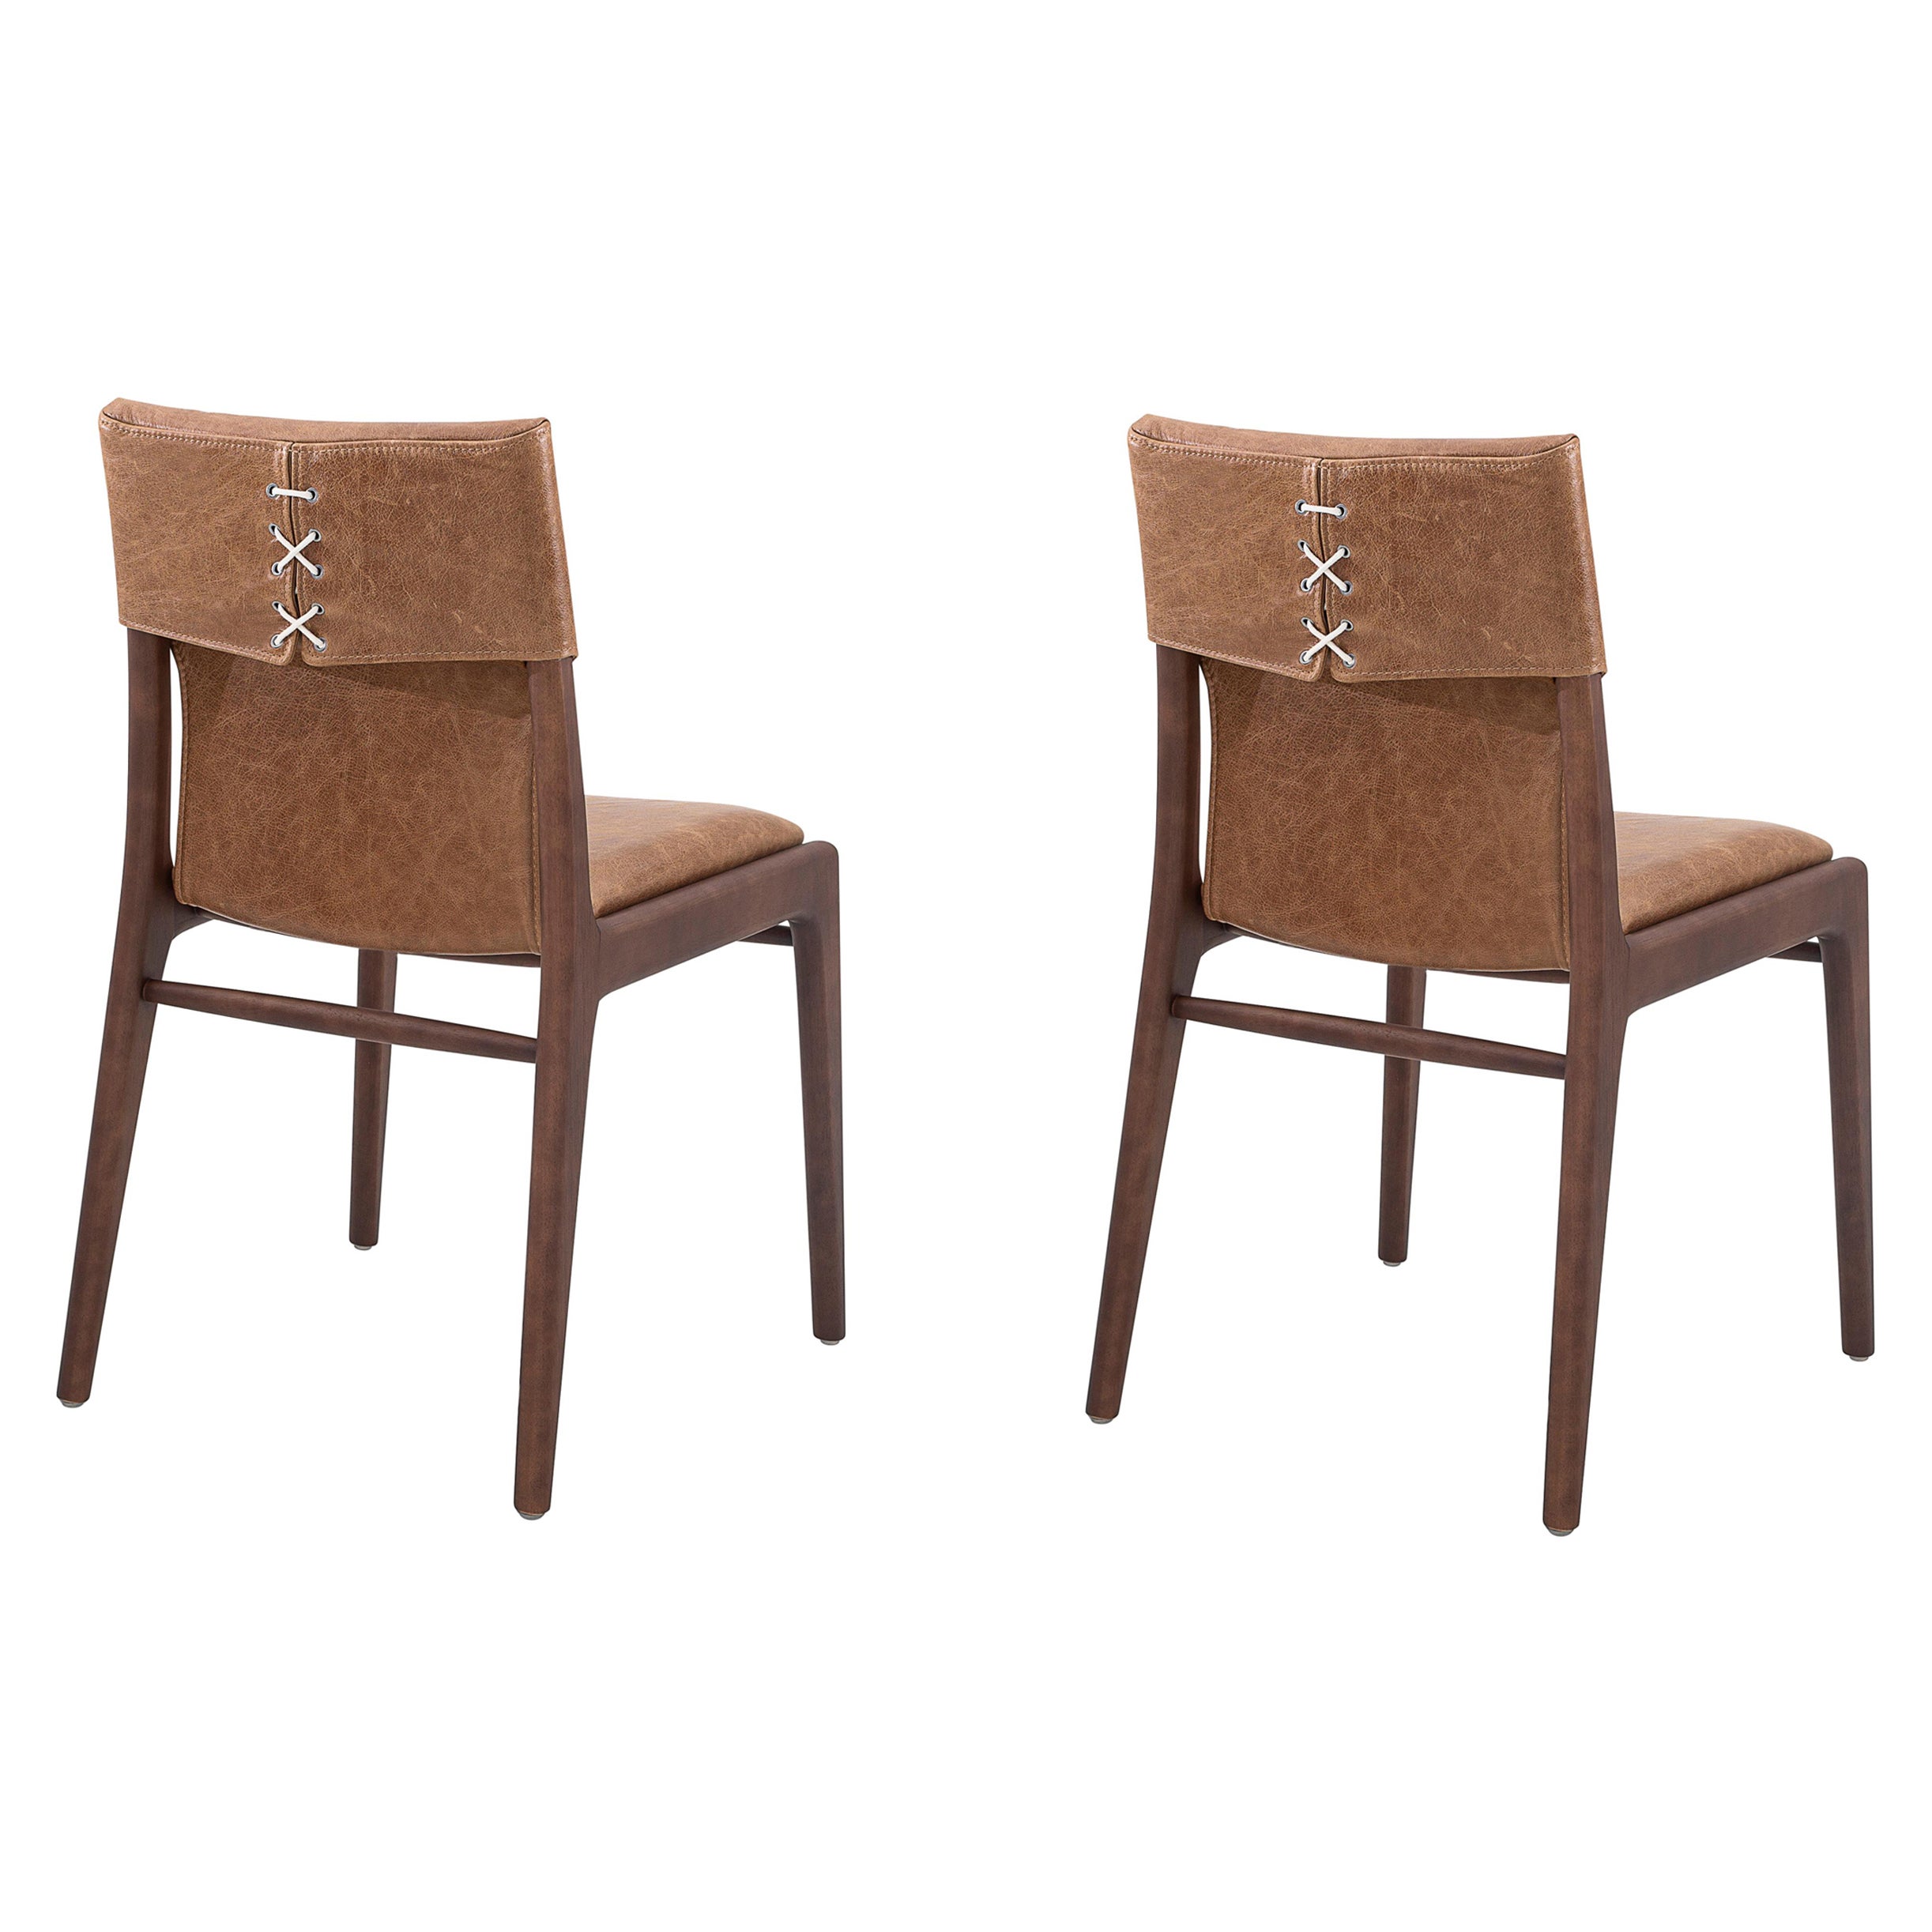 Legendary Uultis designer Mr. Sergio Batista has created the Tress dining chair in a brown leather upholstered and a walnut wood finish. His creations are synonymous with style, elegance, comfort, and quality. With the Tress chair, Mr. Batista has